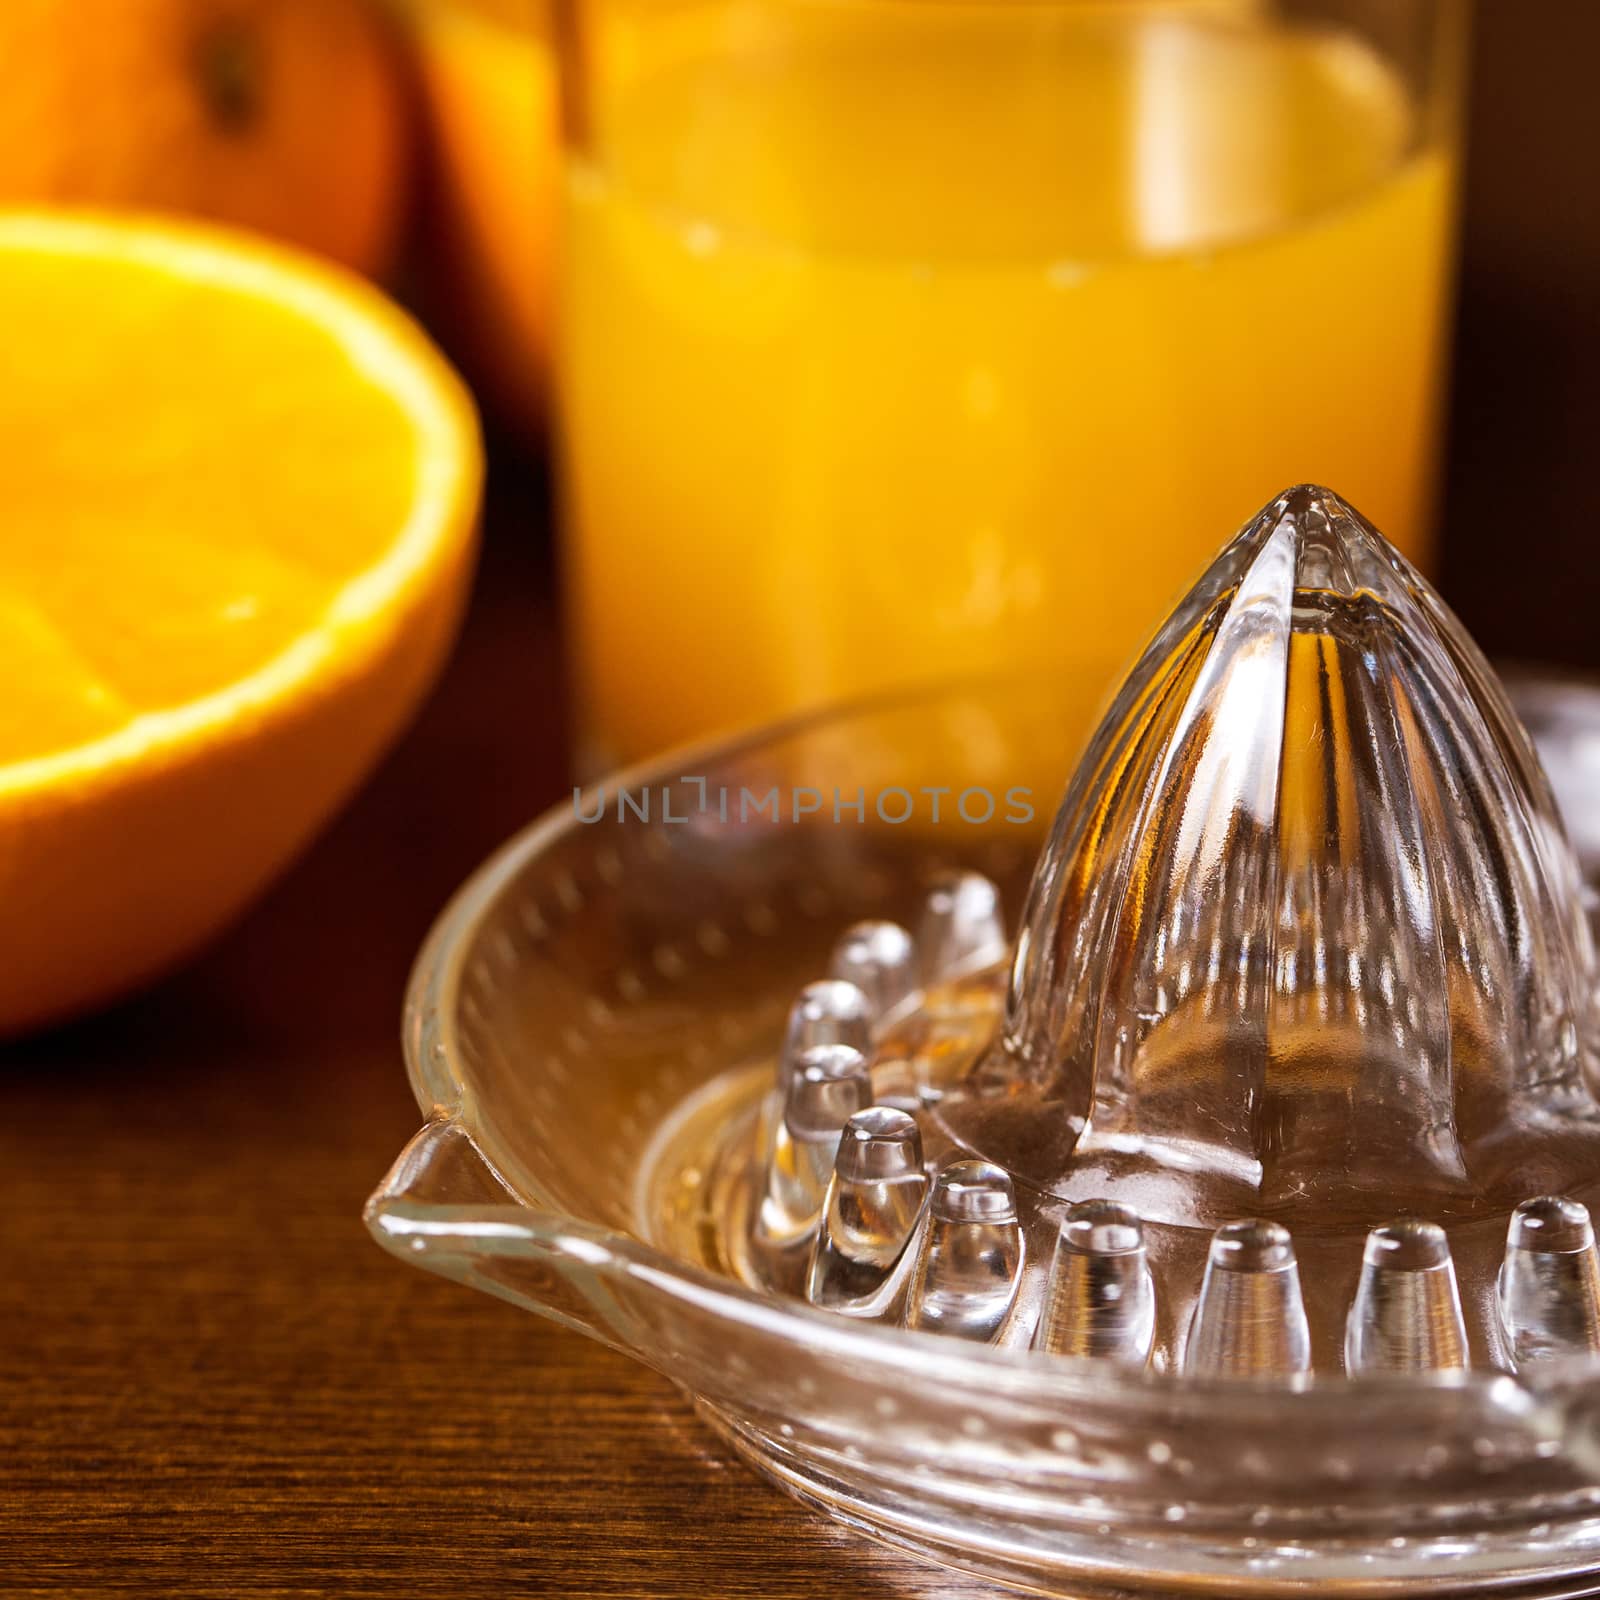 Oranges and a glass of orange juice on a wooden surface